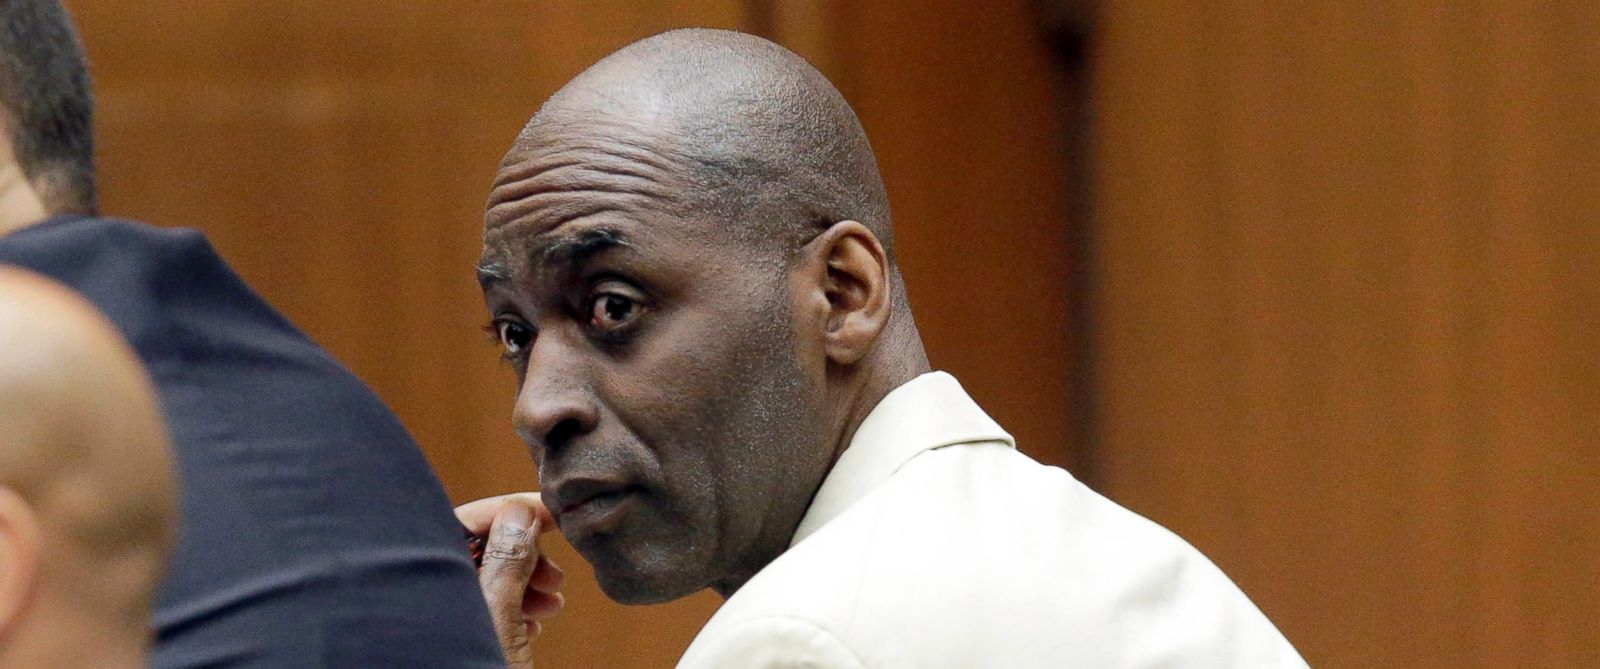 PHOTO: In this May 27, 2016 file photo, actor Michael Jace, who played a police officer on television, appears during closing arguments during his trial at Los Angeles County Superior in Los Angeles.